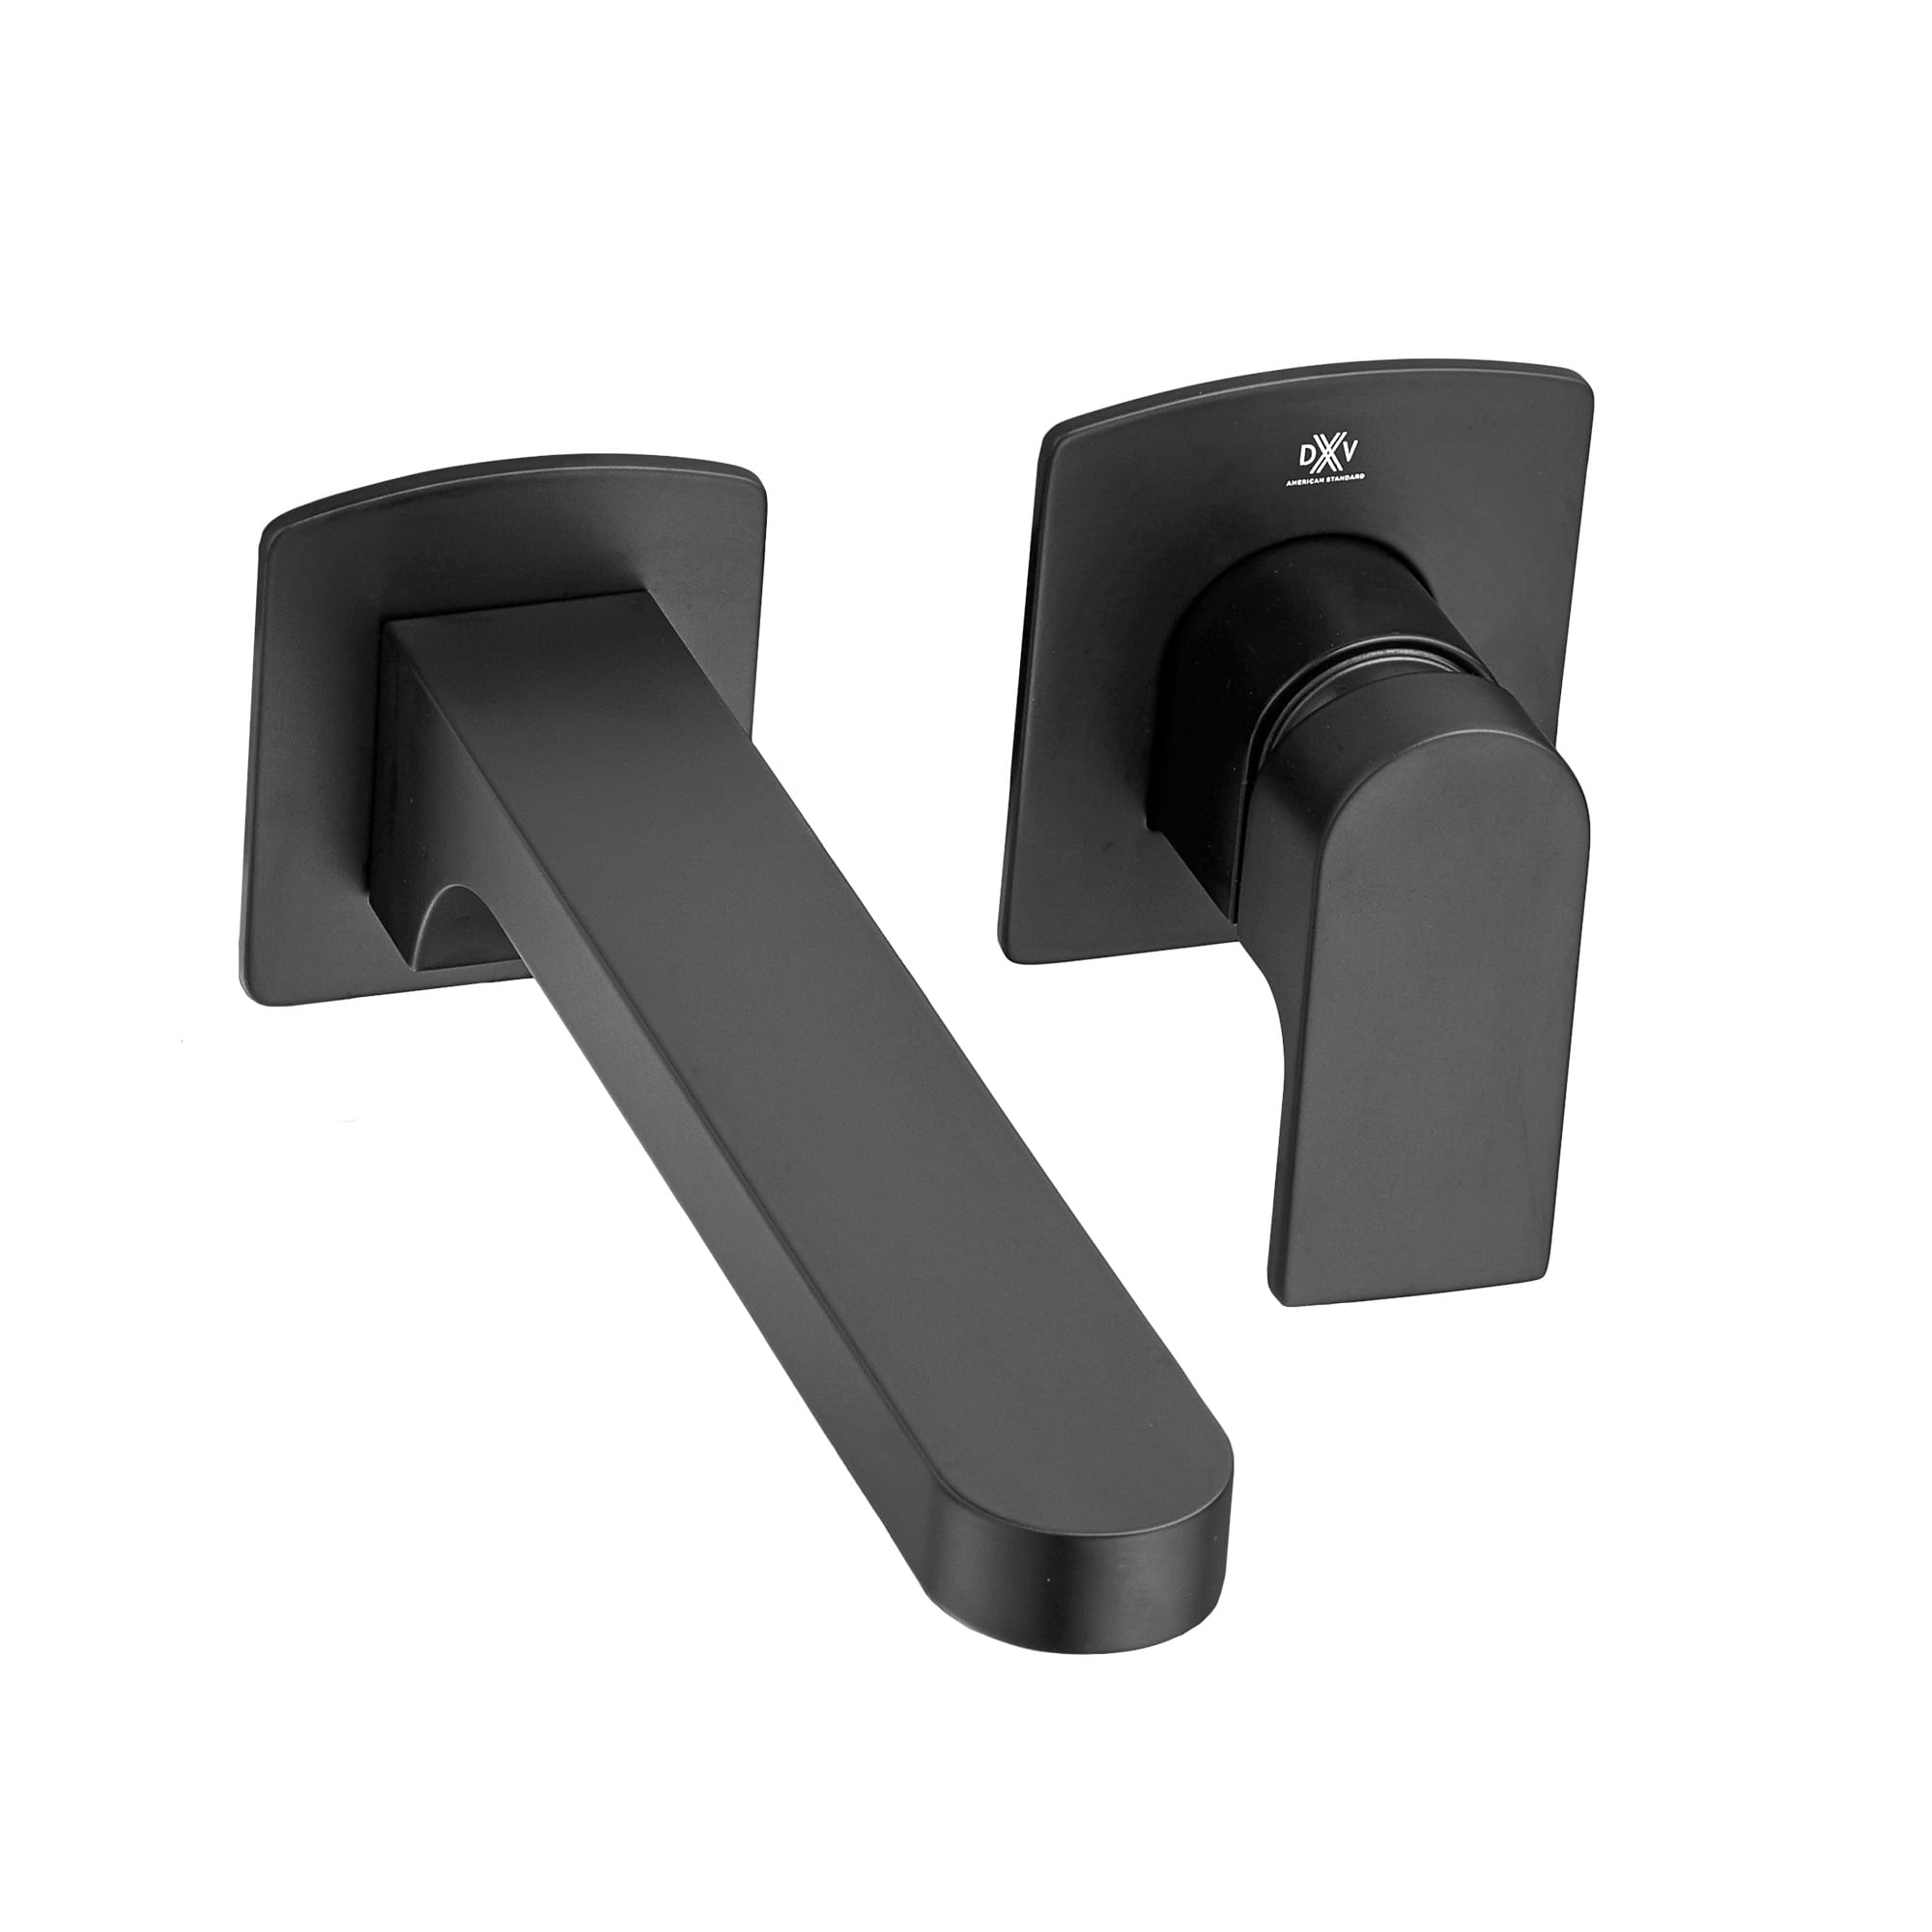 Equility® Wall Mount Faucet